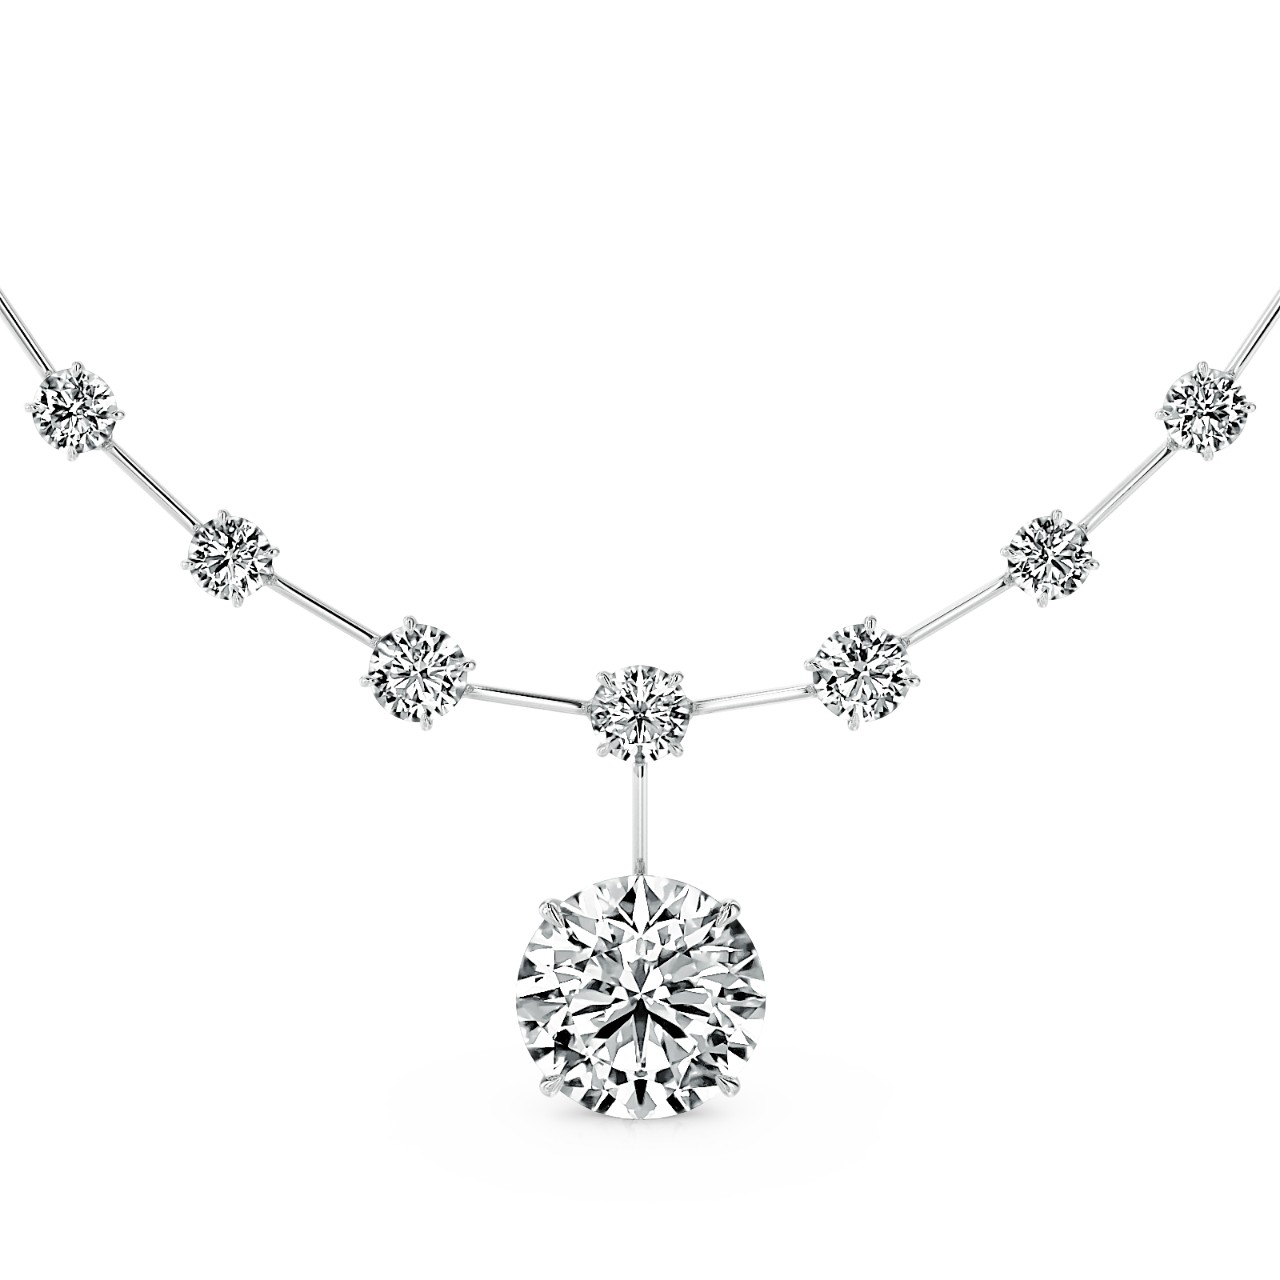  Women's Luxury Round Cut Pendant Necklace in White Gold